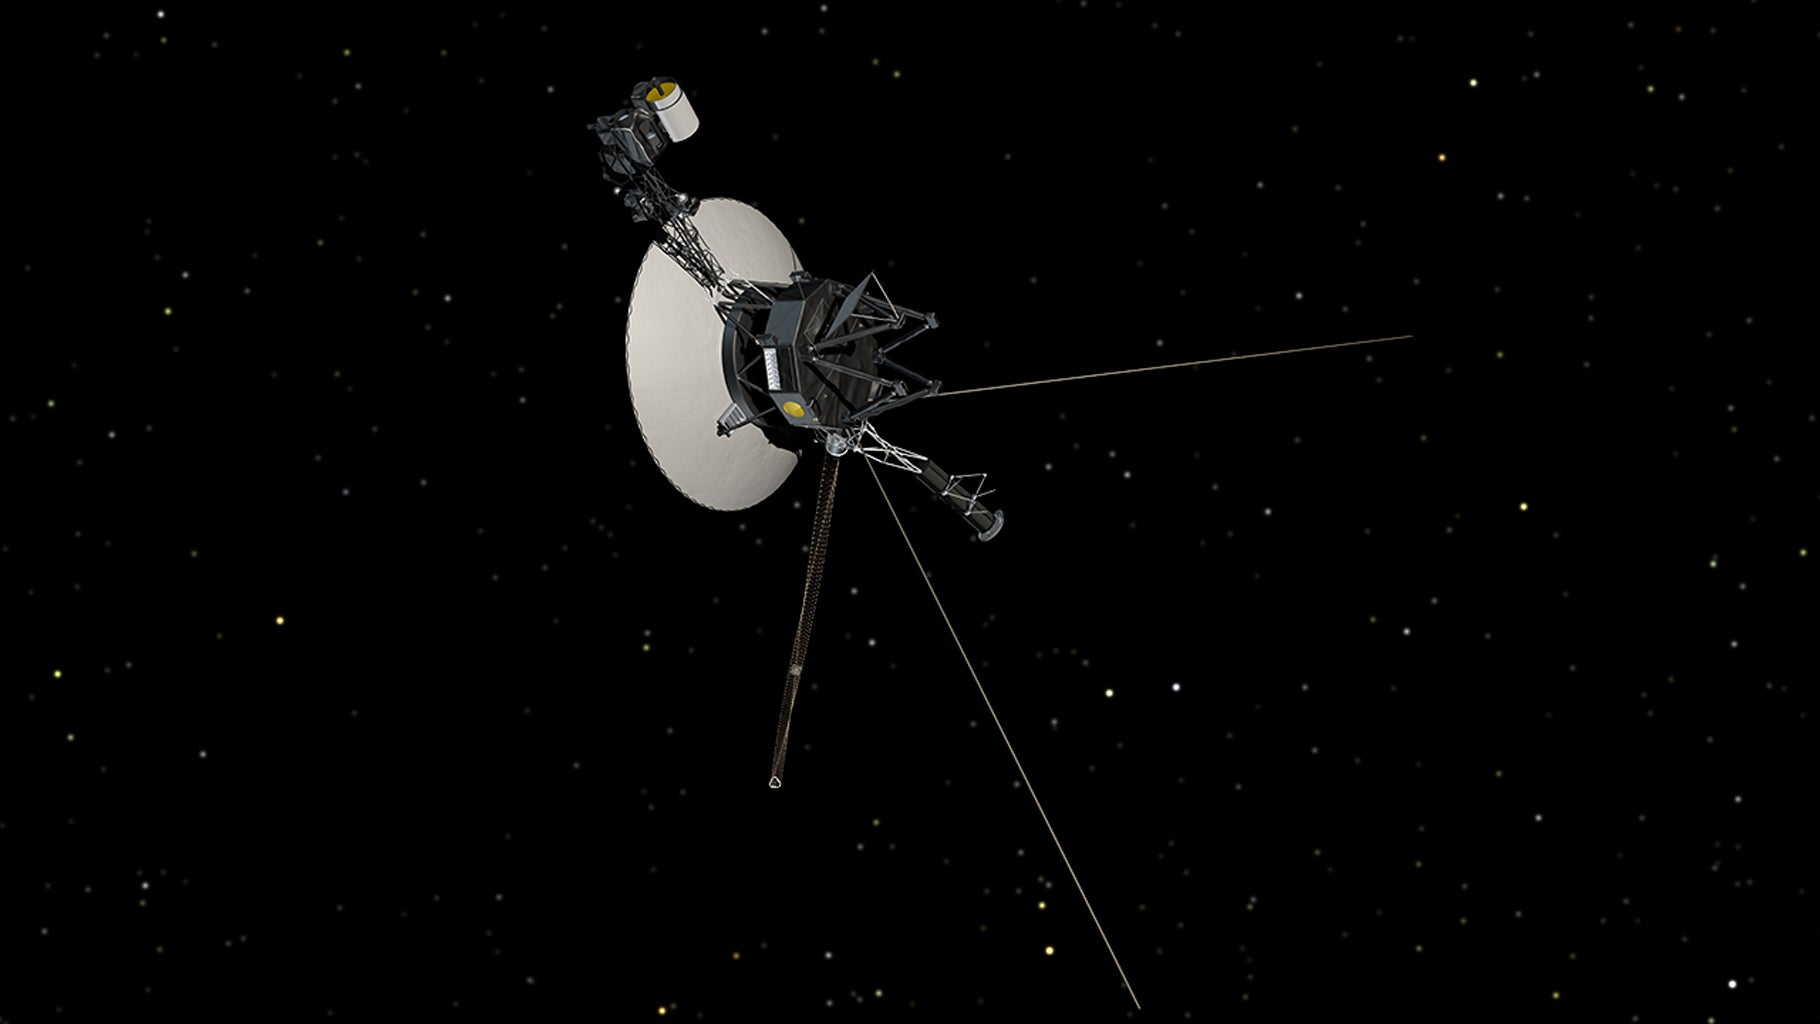 Artist concept showing NASA’s Voyager spacecraft against a backdrop of stars